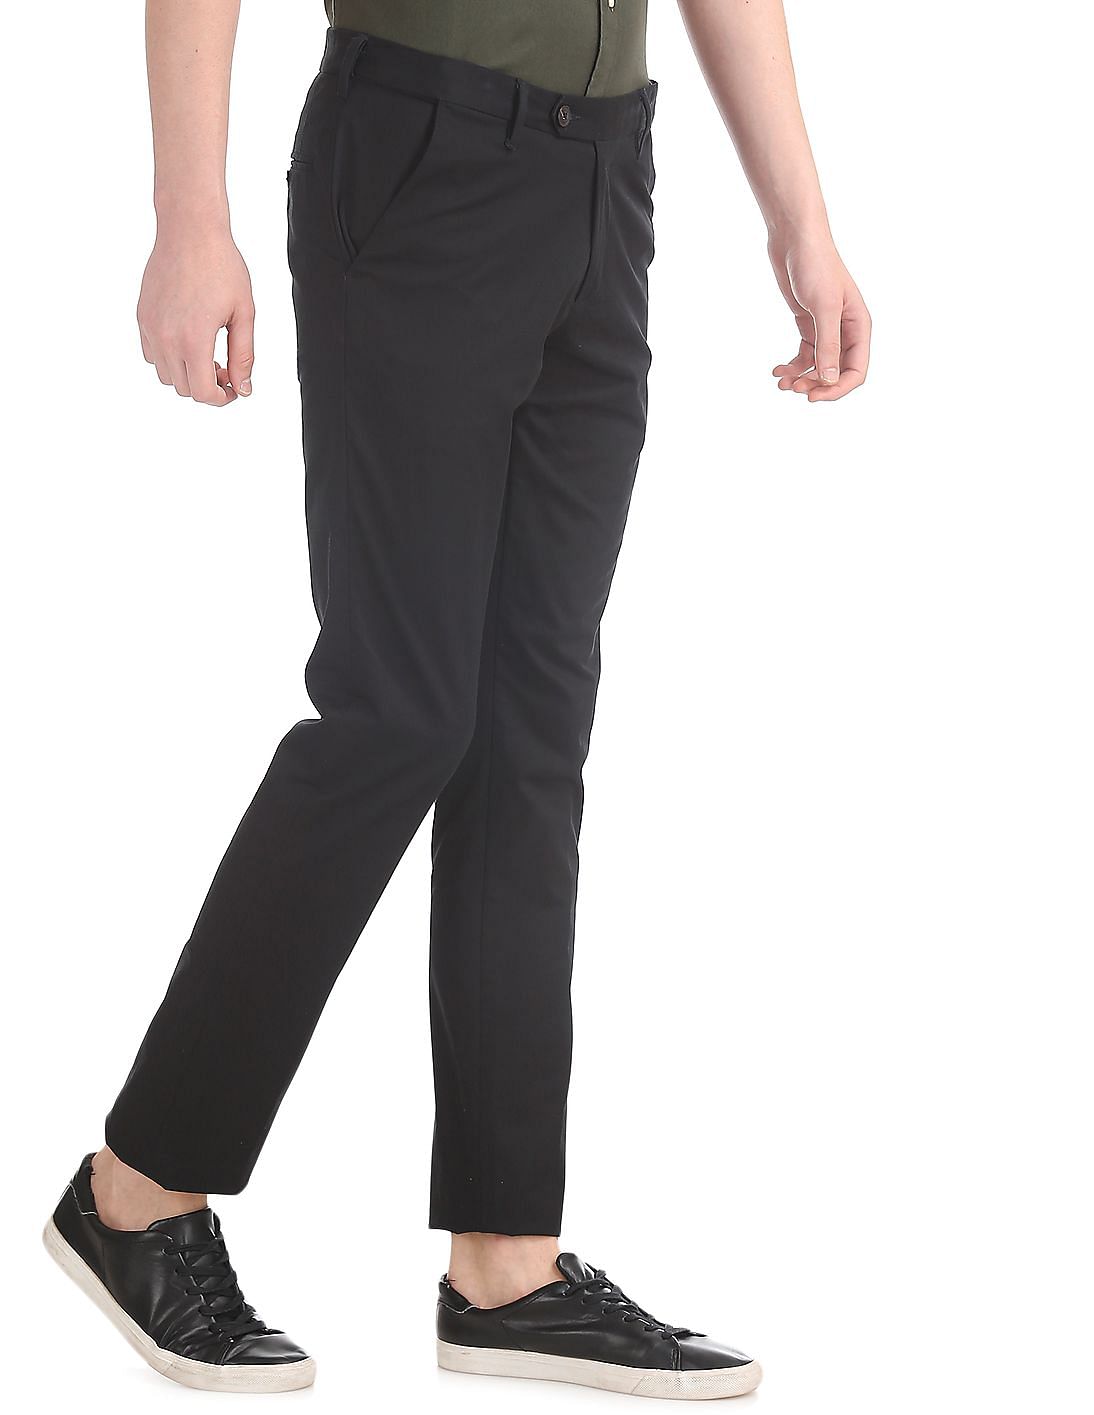 Buy AD by Arvind Black Tailored Regular Fit Solid Trousers - NNNOW.com